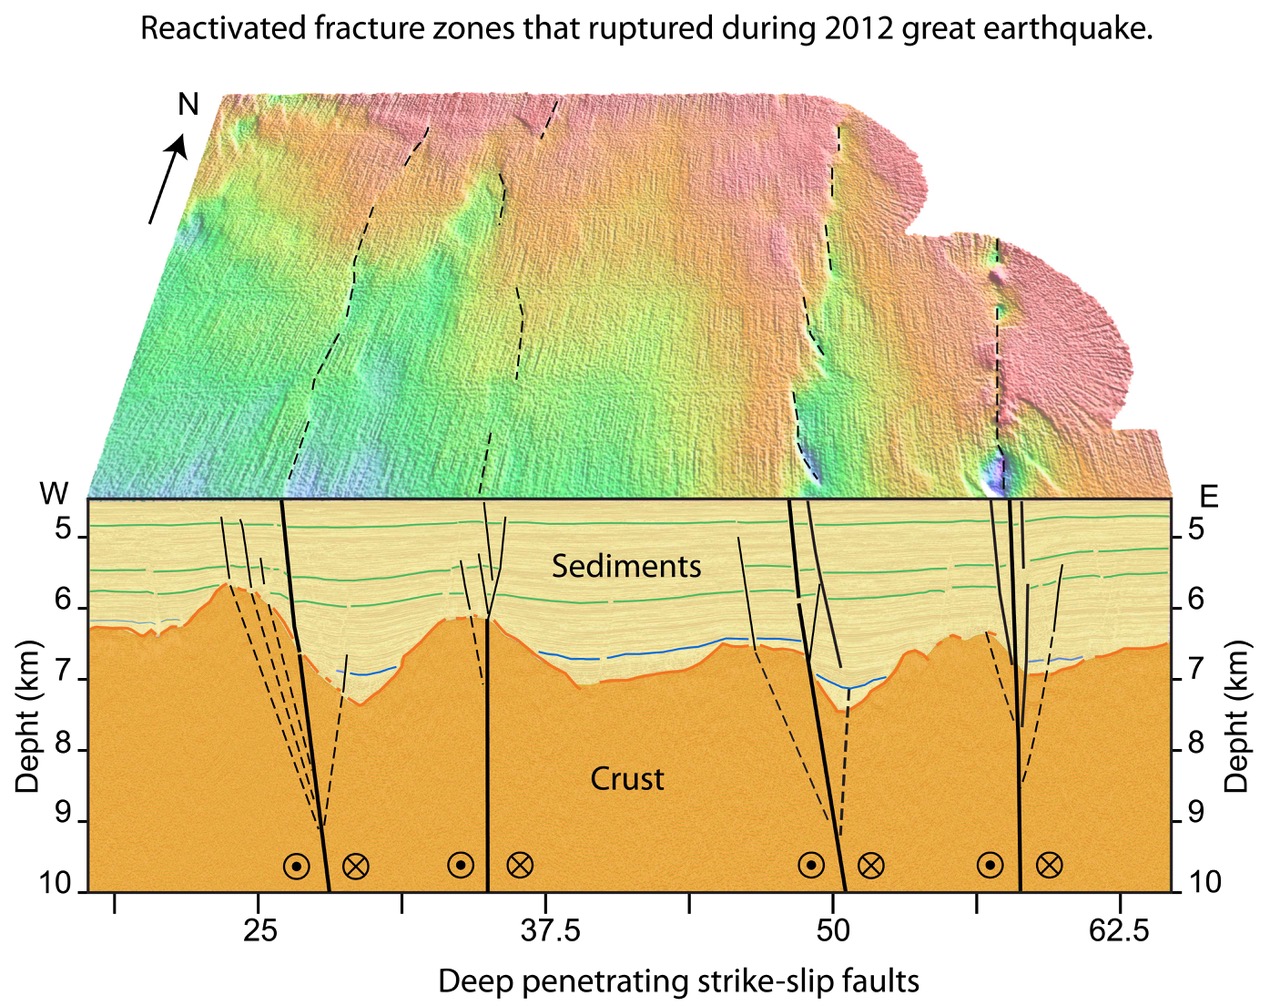 Figure 1: Seismic reflection can show faults and deformation beneath the surface. Here, four fracture zones that were reactivated by the 8.6-magnitude Wharton Basin earthquake are shown (Source: Singh et al., Science Advances 2017)